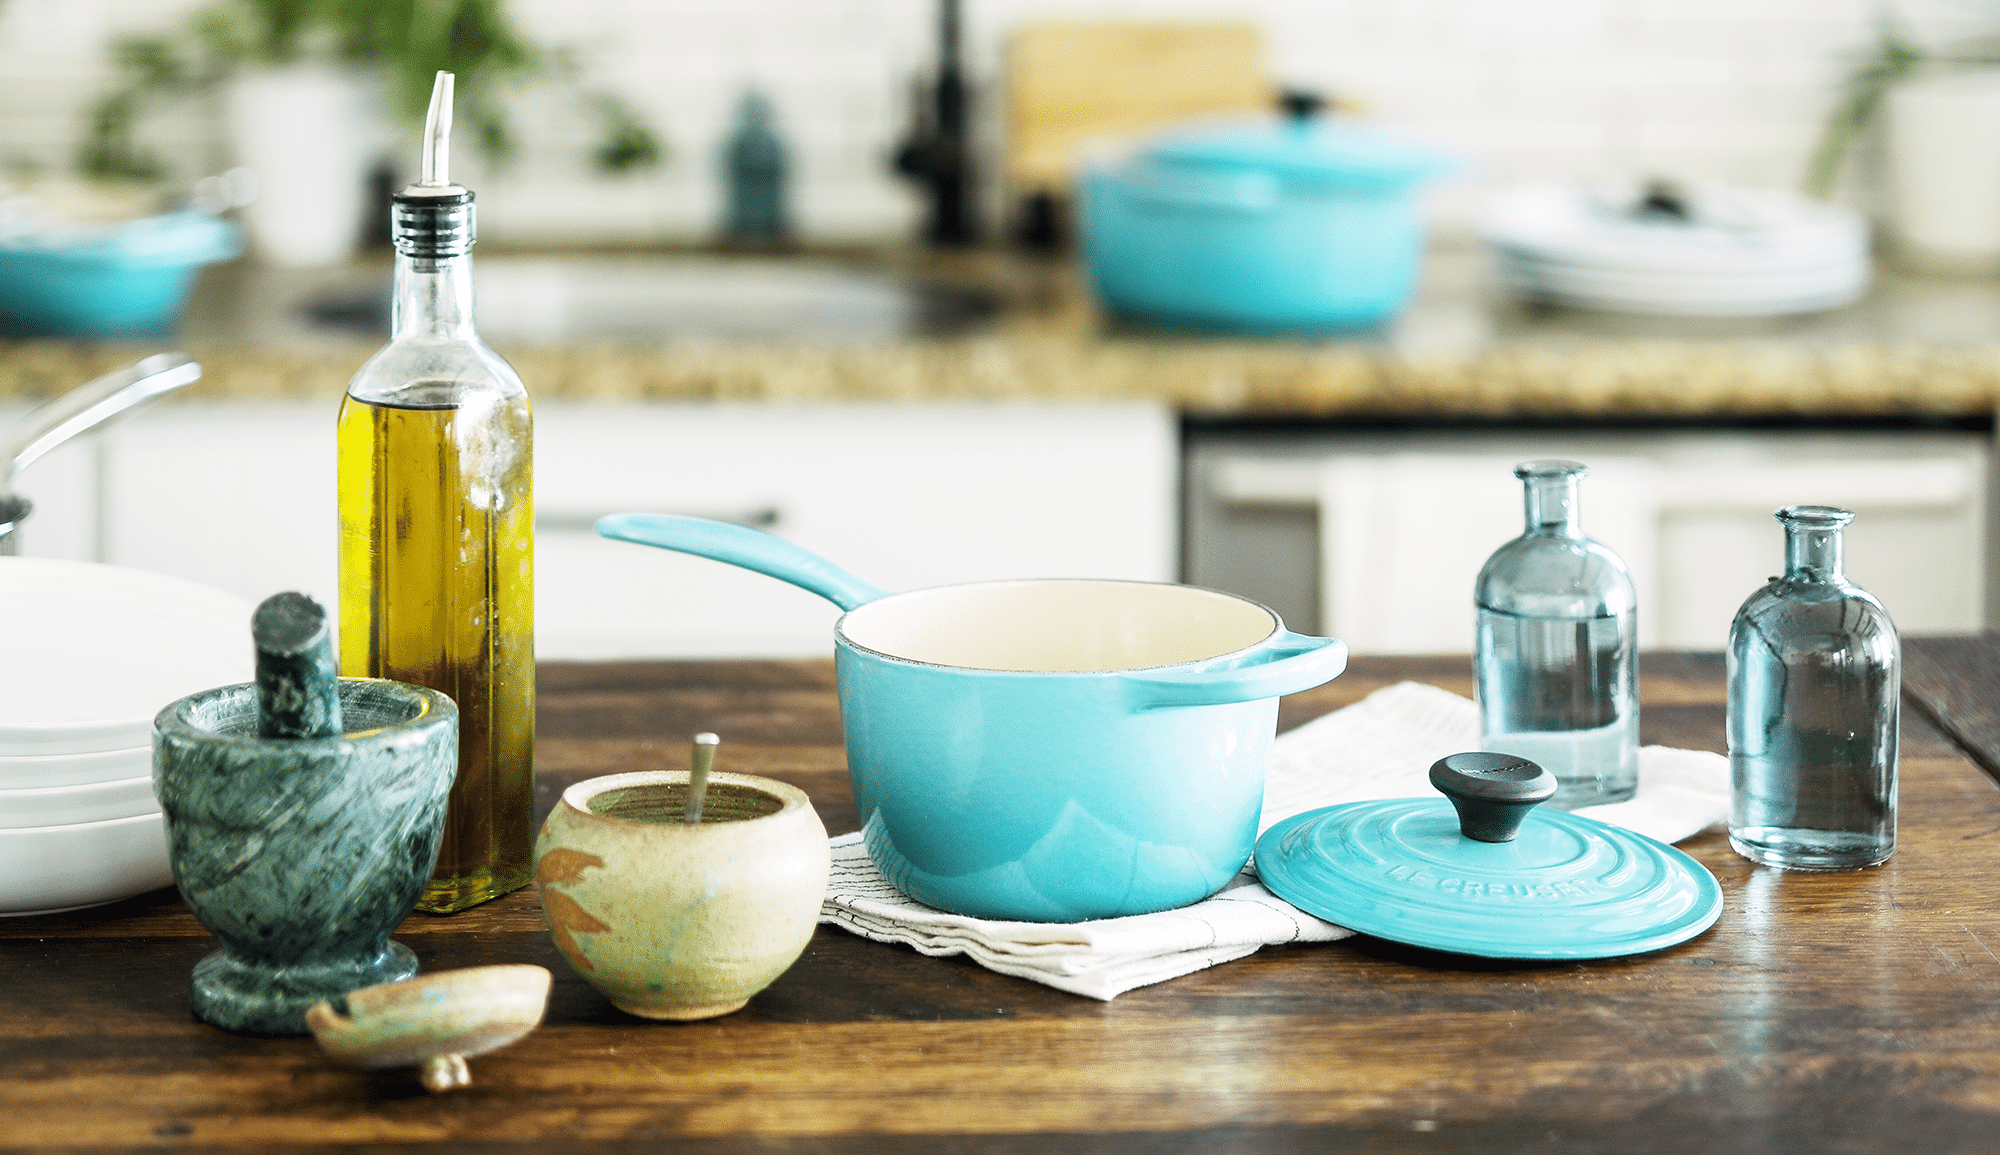 Kitchen counter with a mortar & pestle, blue ceramic pots and pans and various cooking oils